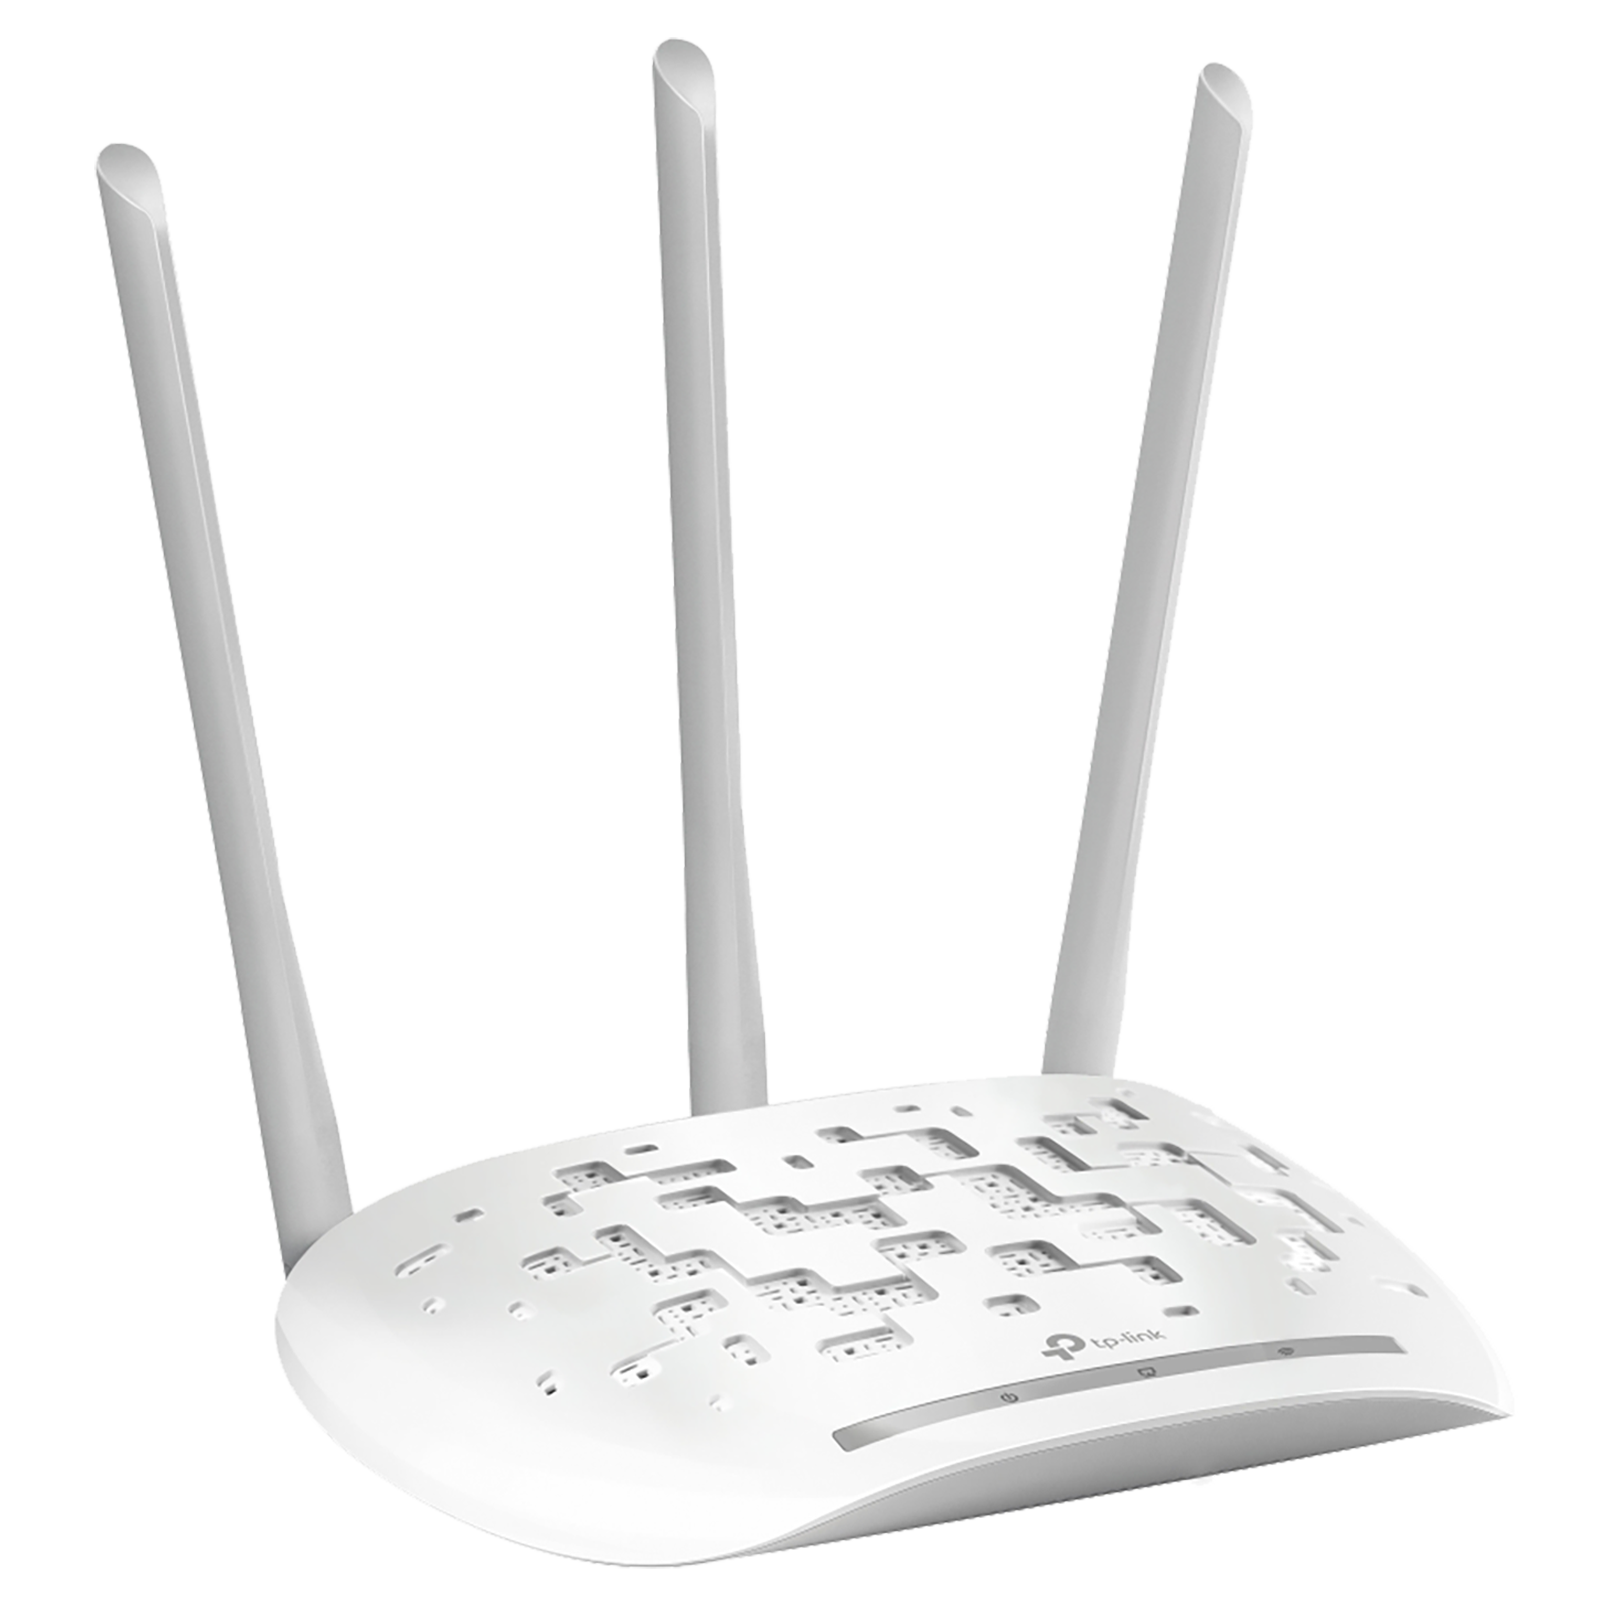 

tp-link TL-WA901N N450 Single Band Wi-Fi Access Point (3 Antennas, Passive PoE Supported, 1750502419, White)